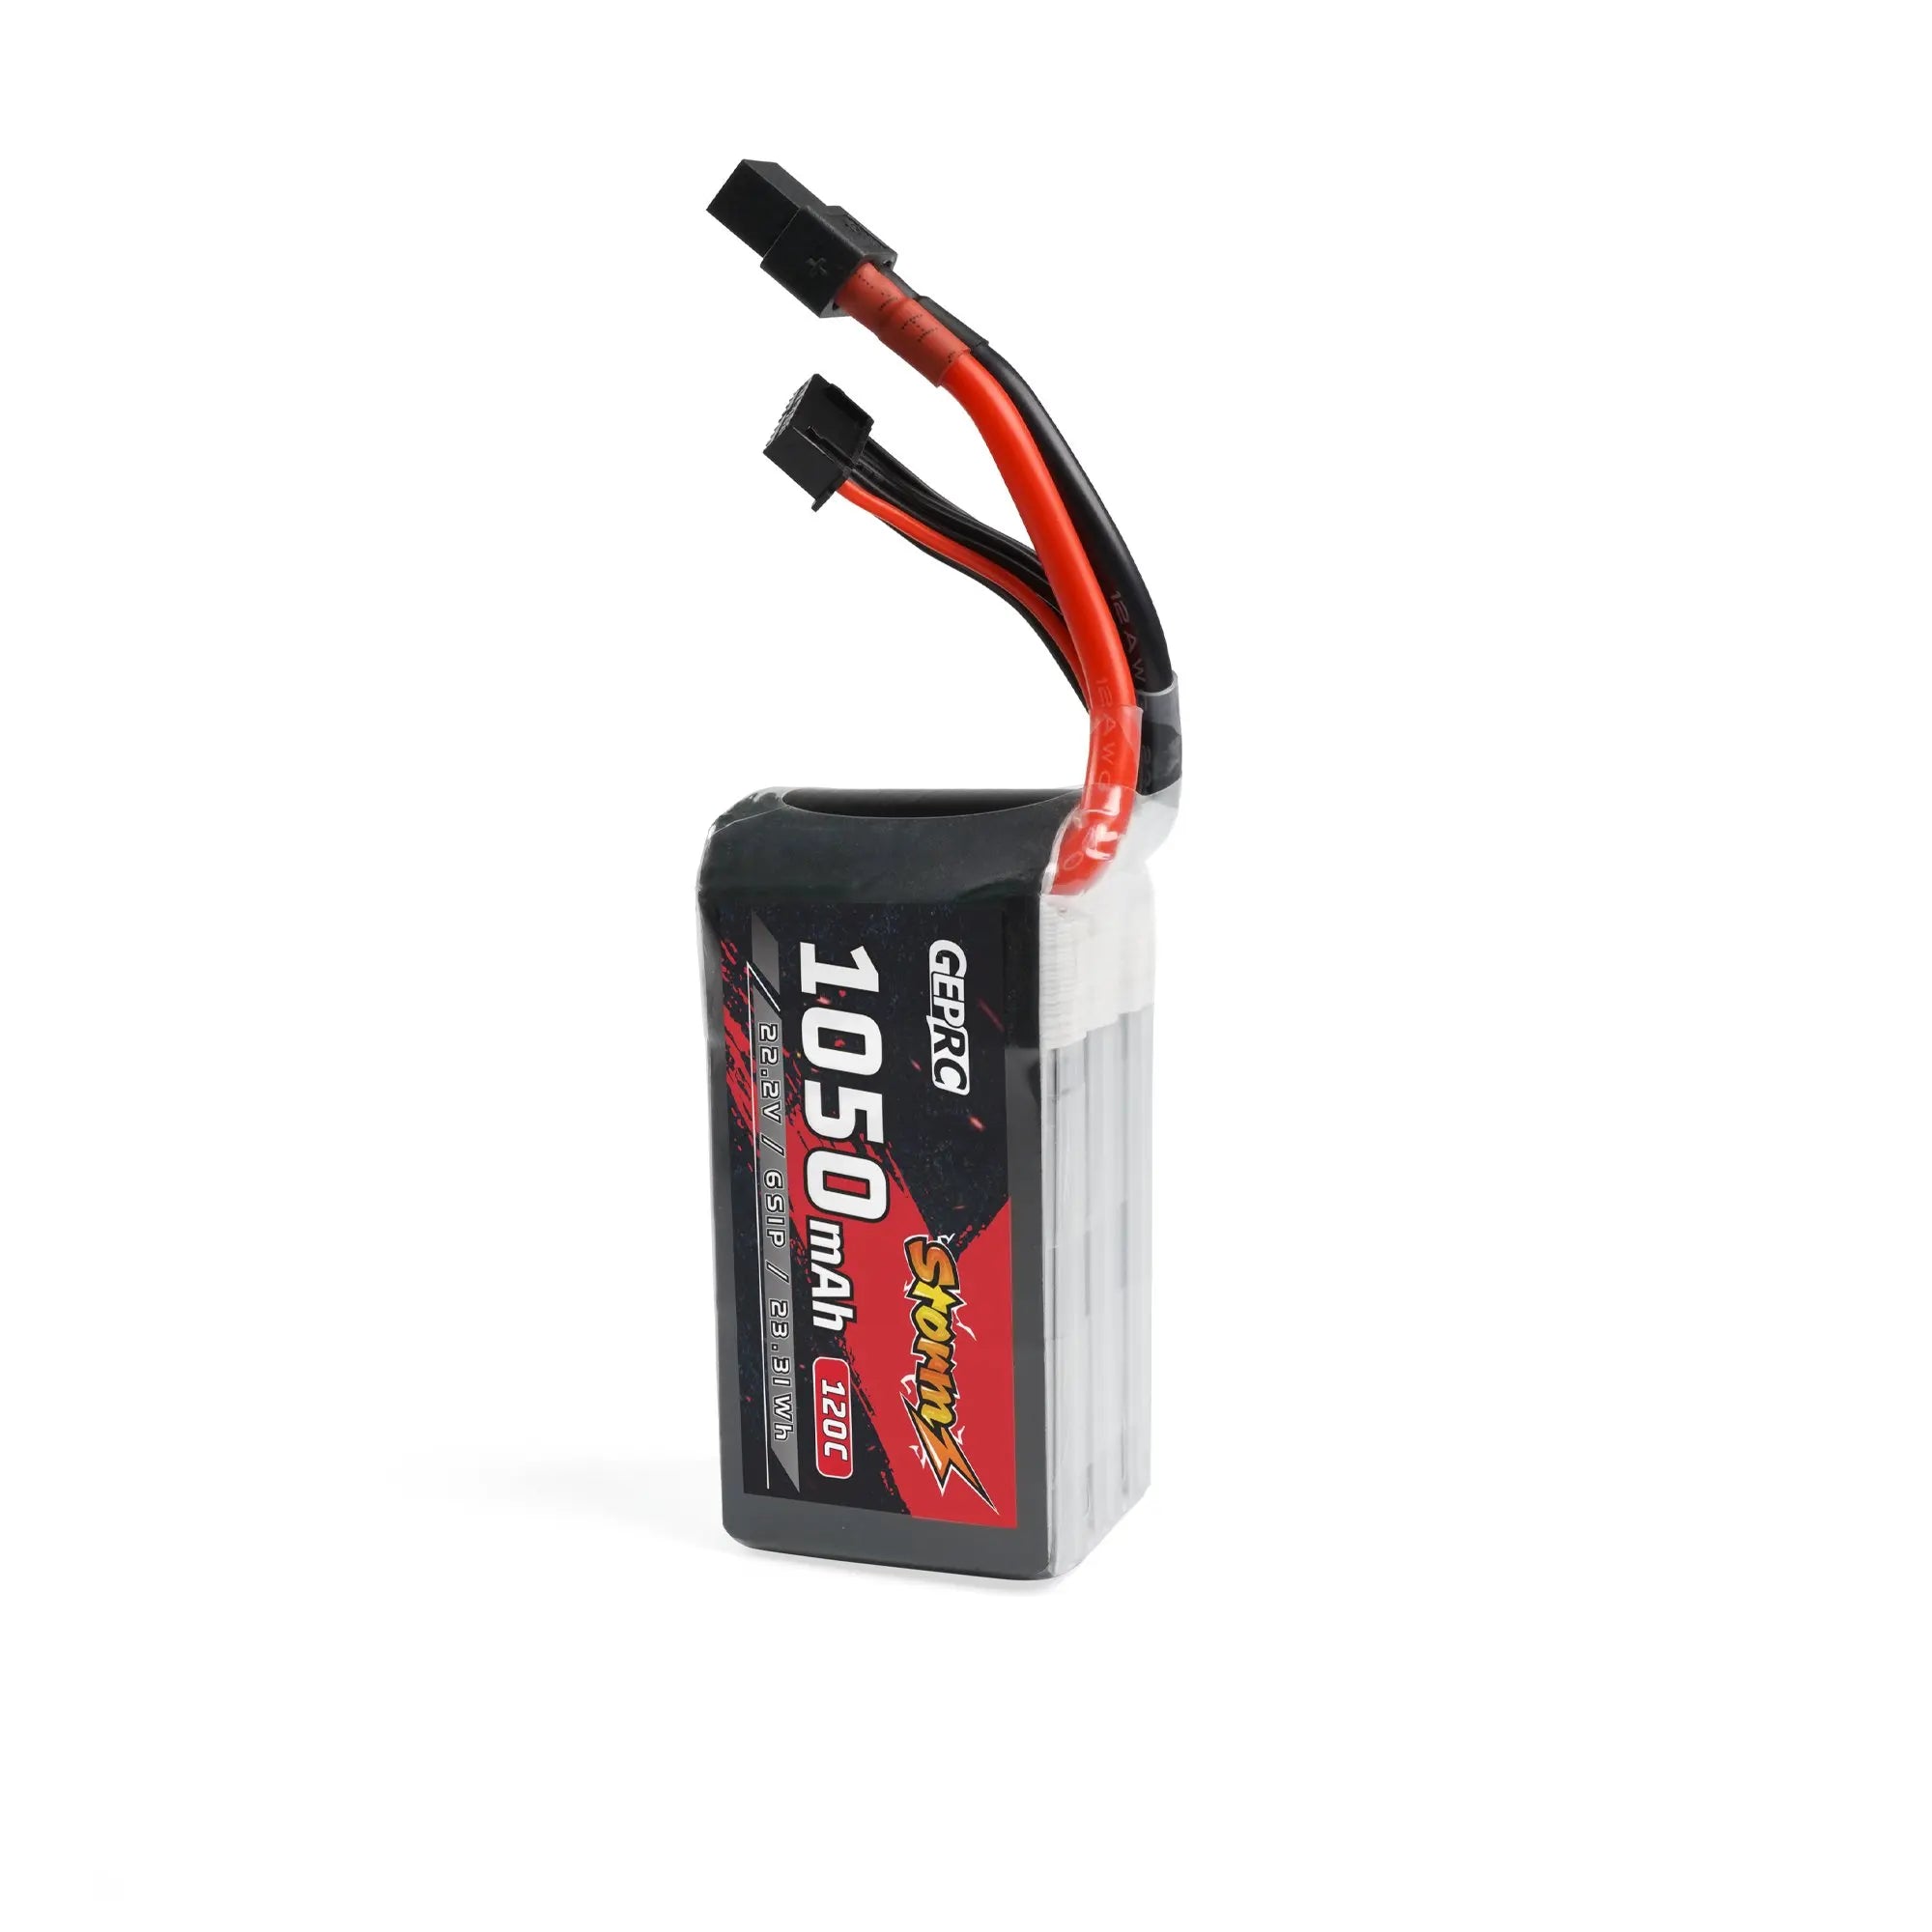 GEPRC Storm 6S 1050mAh 120C Lipo FPV Battery, don't place the battery close to open flames or fire sources